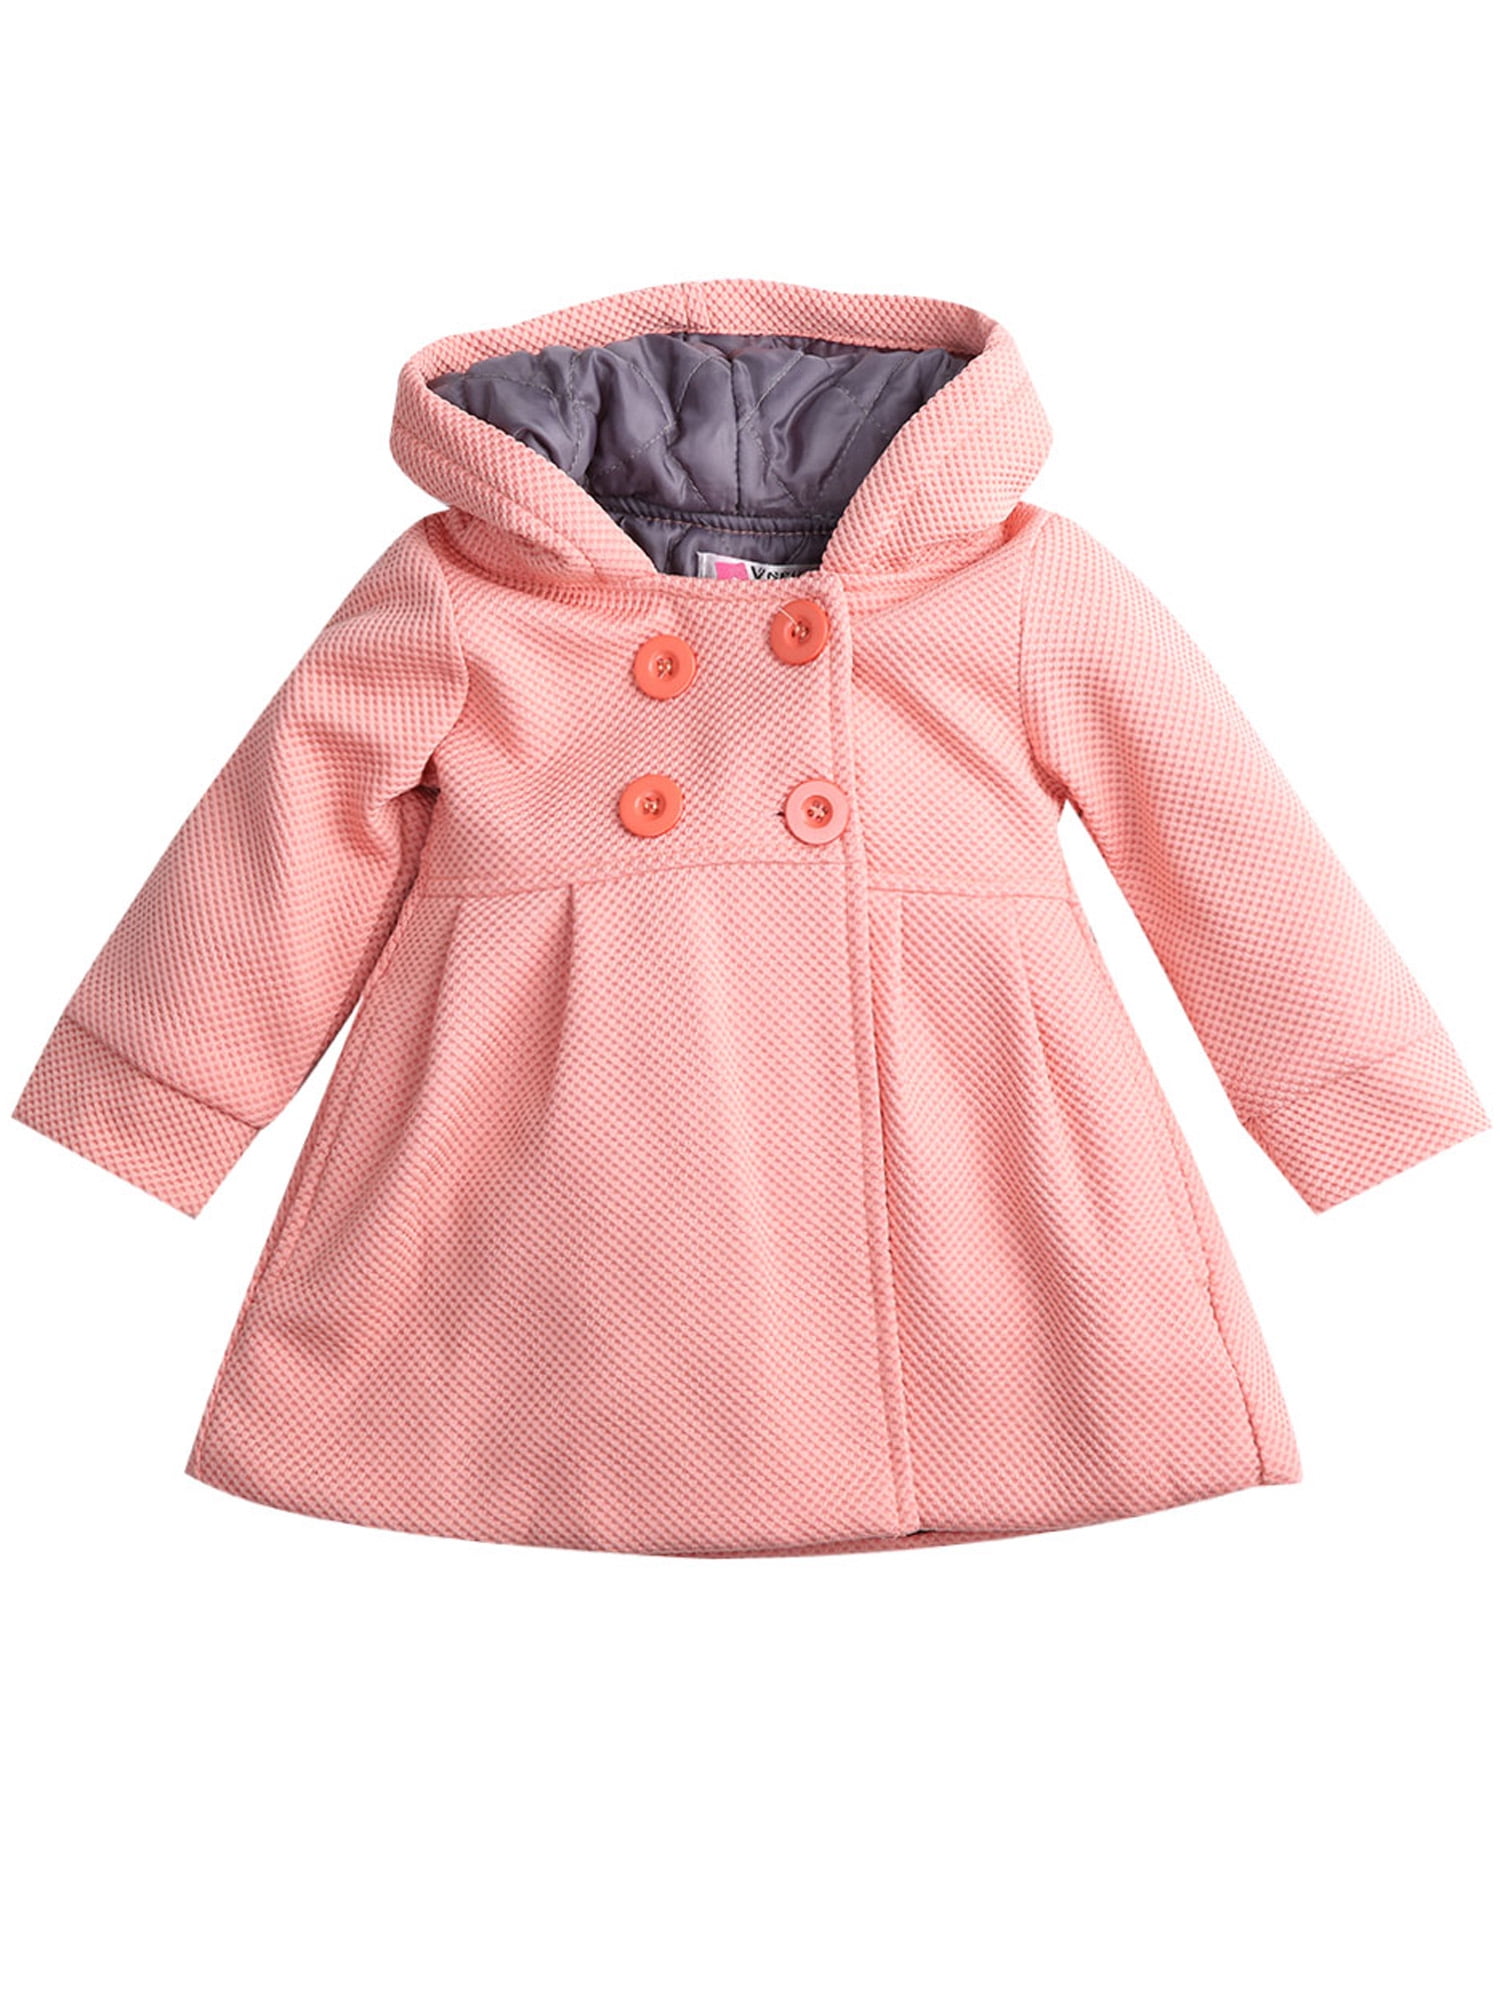 Verypoppa Baby Girls Hooded Long Sleeve A Line Trench Coat Jacket Outwear Top